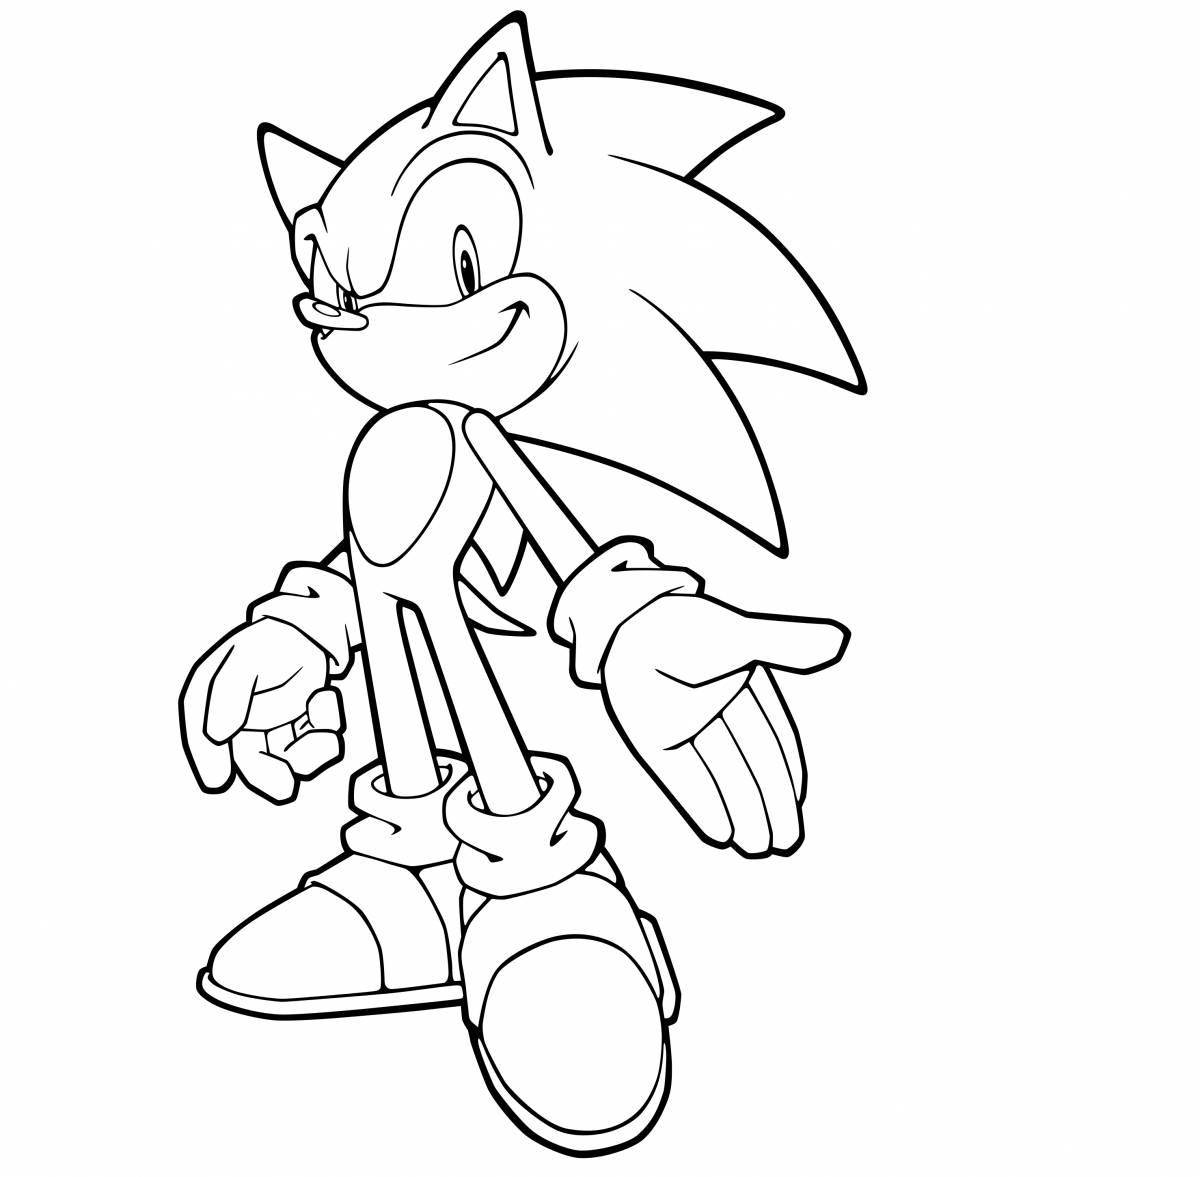 Sonic by numbers coloring book